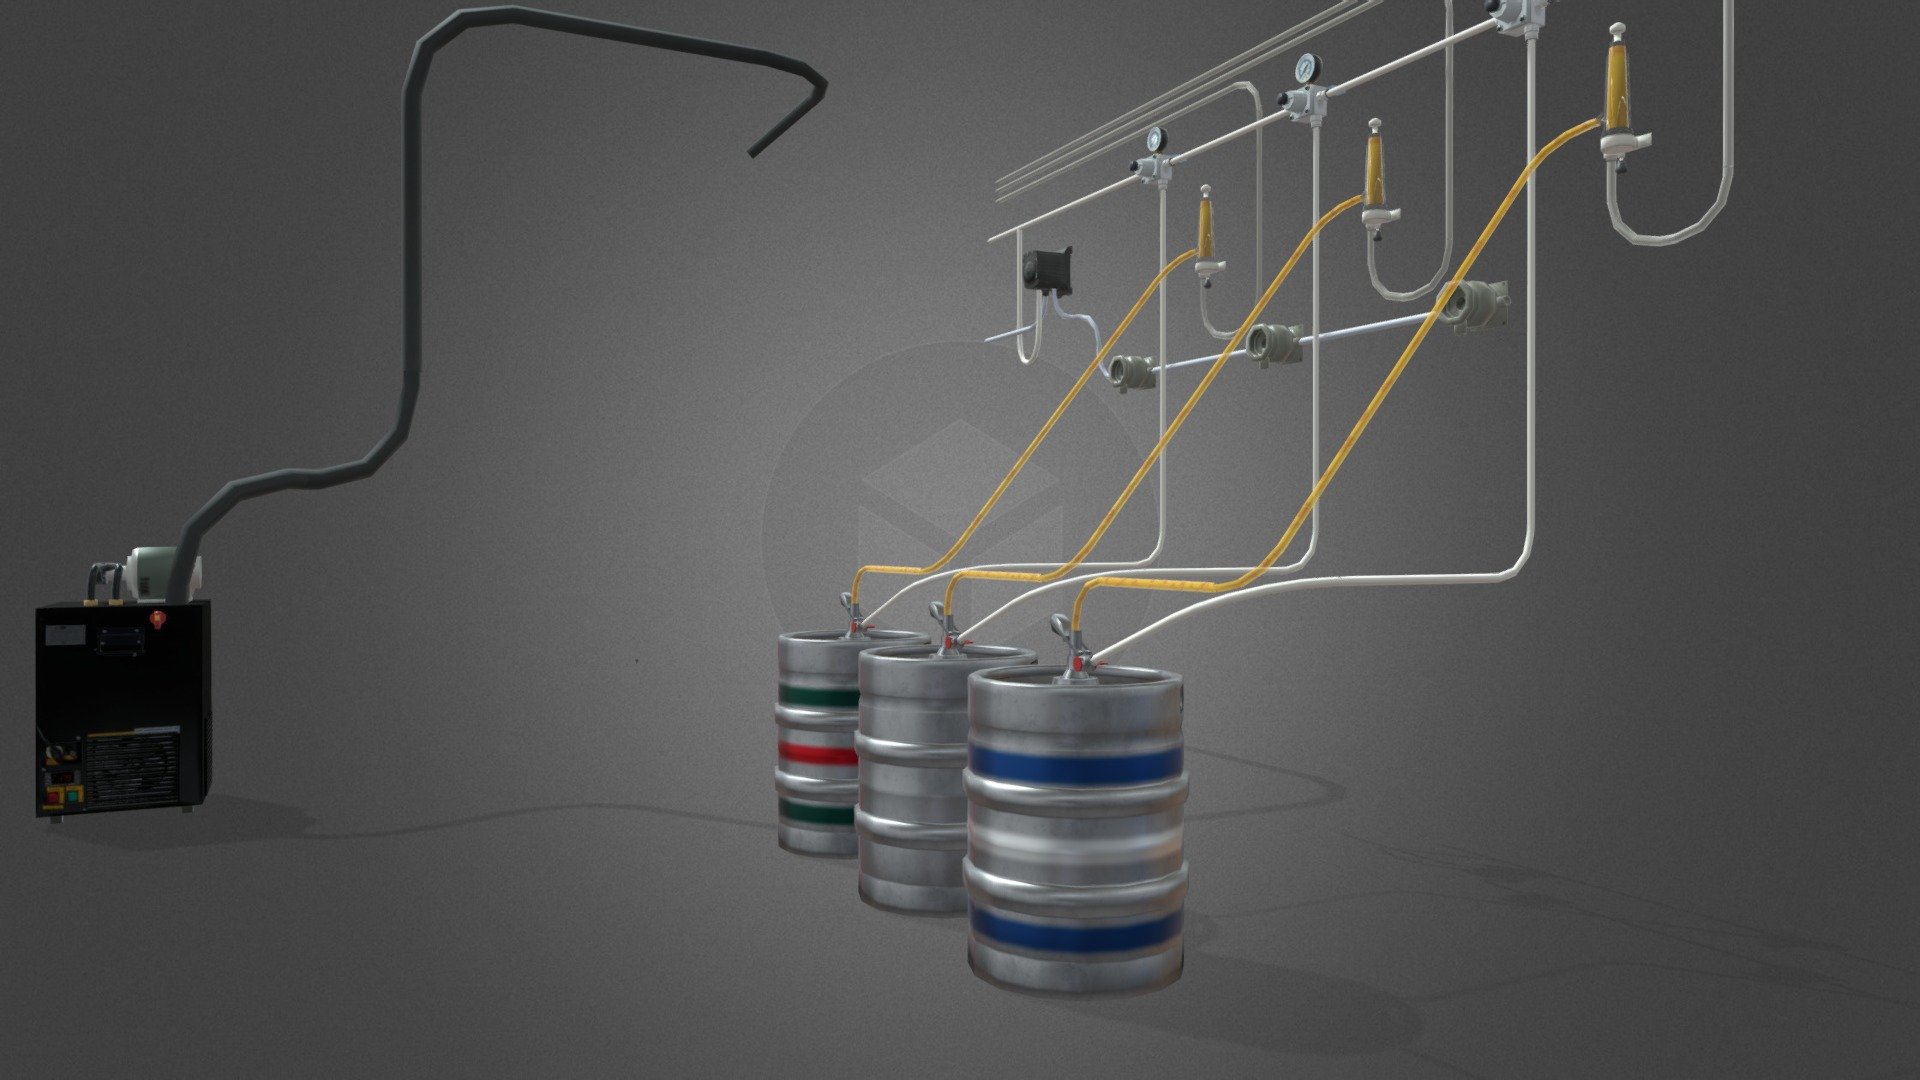 A glycol-cooled draft beer system used in pub and bar cellars to deliver beer from the Keg to the Tap.

Part of the Pub &amp; Micro Brewery Asset Pack avaliable on Unity Asset Store.

Features:


Quad-based mesh
Low-poly model suitable for realtime rendering (game engines, AR, VR)
1024px PBR textures, set up for Unity Standard Shader (smoothness is in alpha channel of metallic)

Included files:


Original .blend file 
FBX file
Textures
Reference images where appropriate

Check out the rest of the Brewery Collection: https://skfb.ly/6RwyO - Draft Beer System - Buy Royalty Free 3D model by Stainless Reality Ltd (@StainlessReality) 3d model